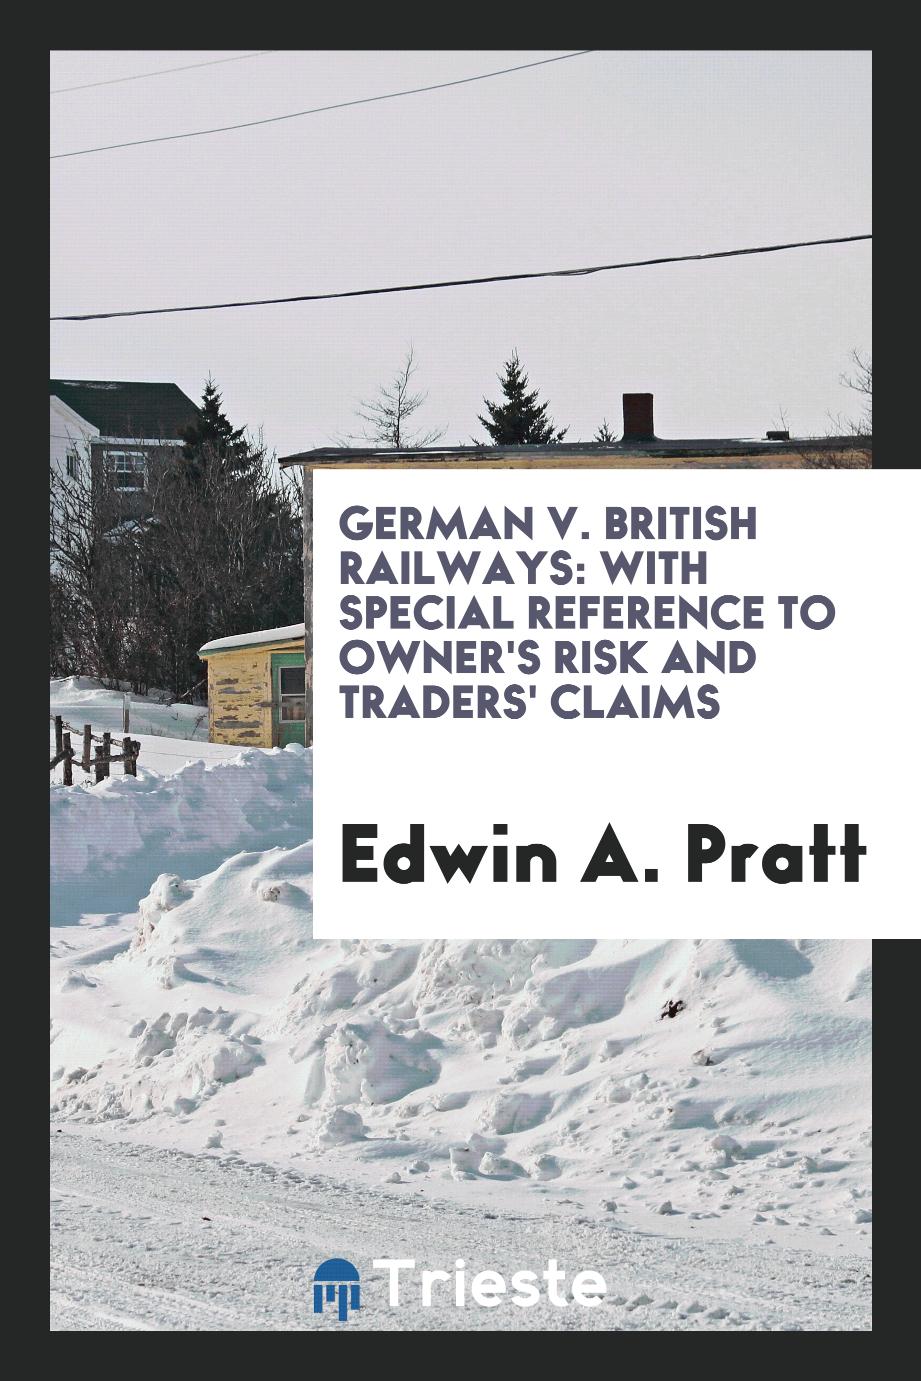 German V. British Railways: With Special Reference to Owner's Risk and Traders' Claims